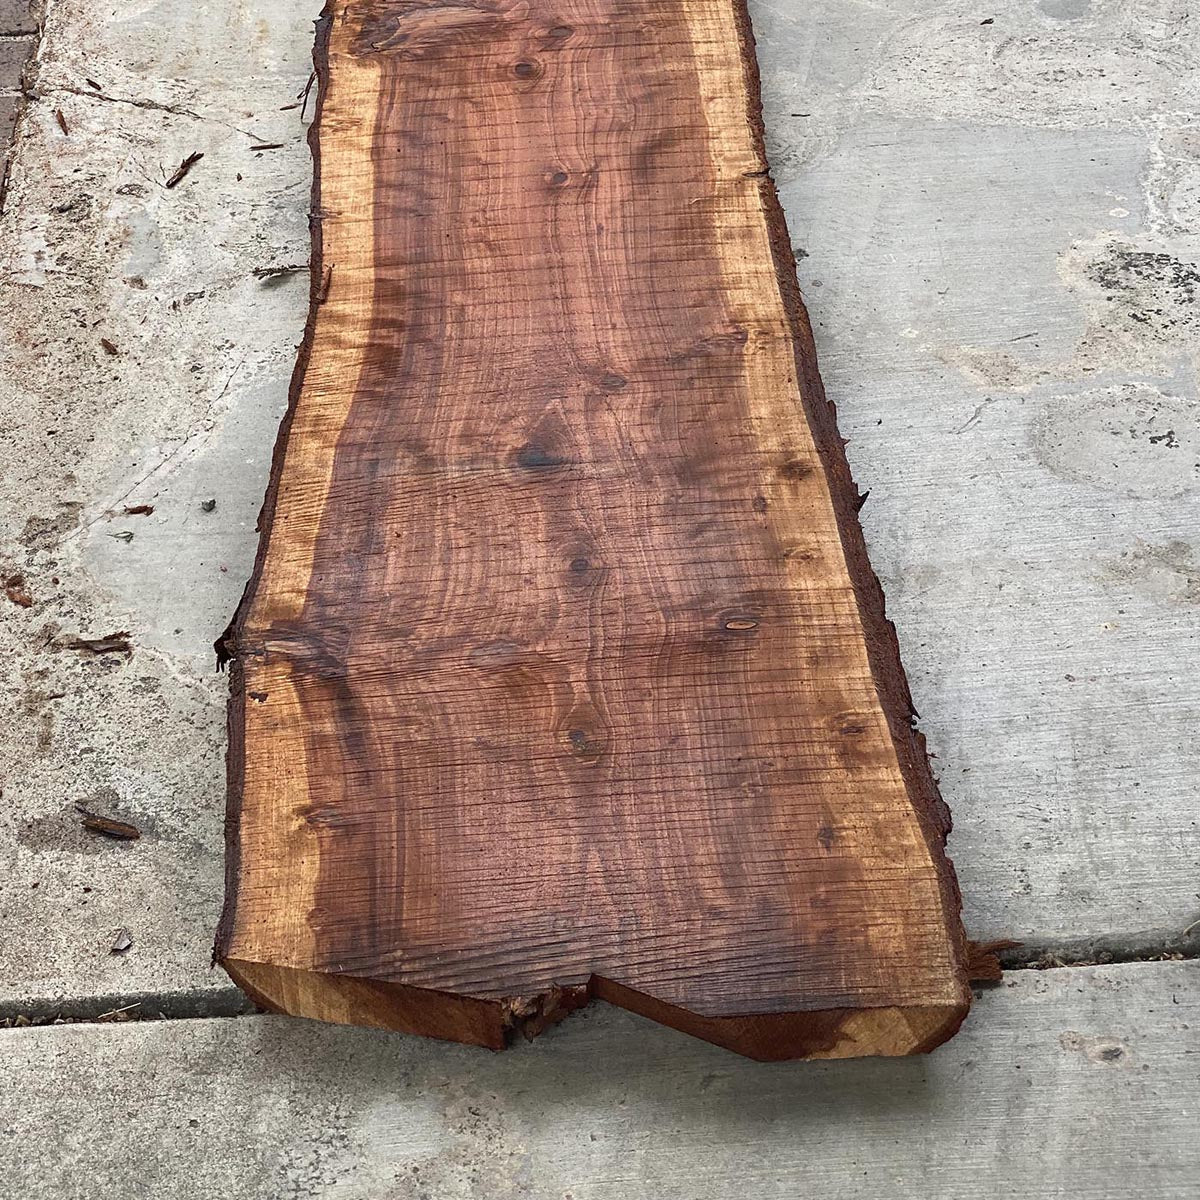 California Redwood Live-Edge Slab / Planks 9 ft x 16 in x 2.5 in Thick